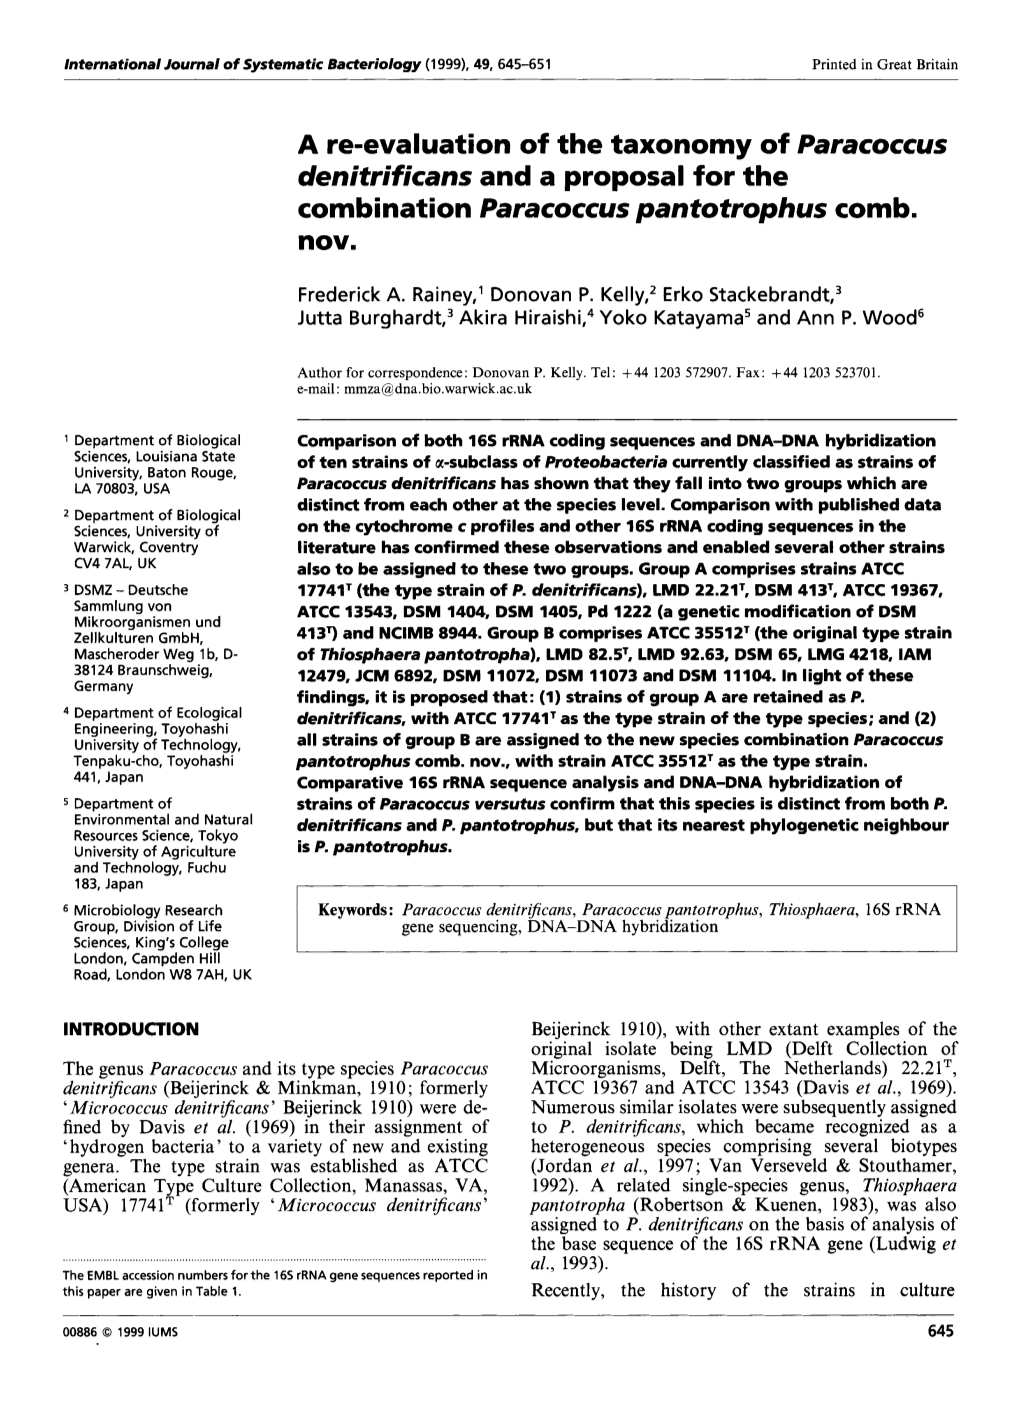 A Re-Evaluation of the Taxonomy of Paracoccus Denitrificans and a Proposal for the Combination Paracoccus Pantotrophus Comb